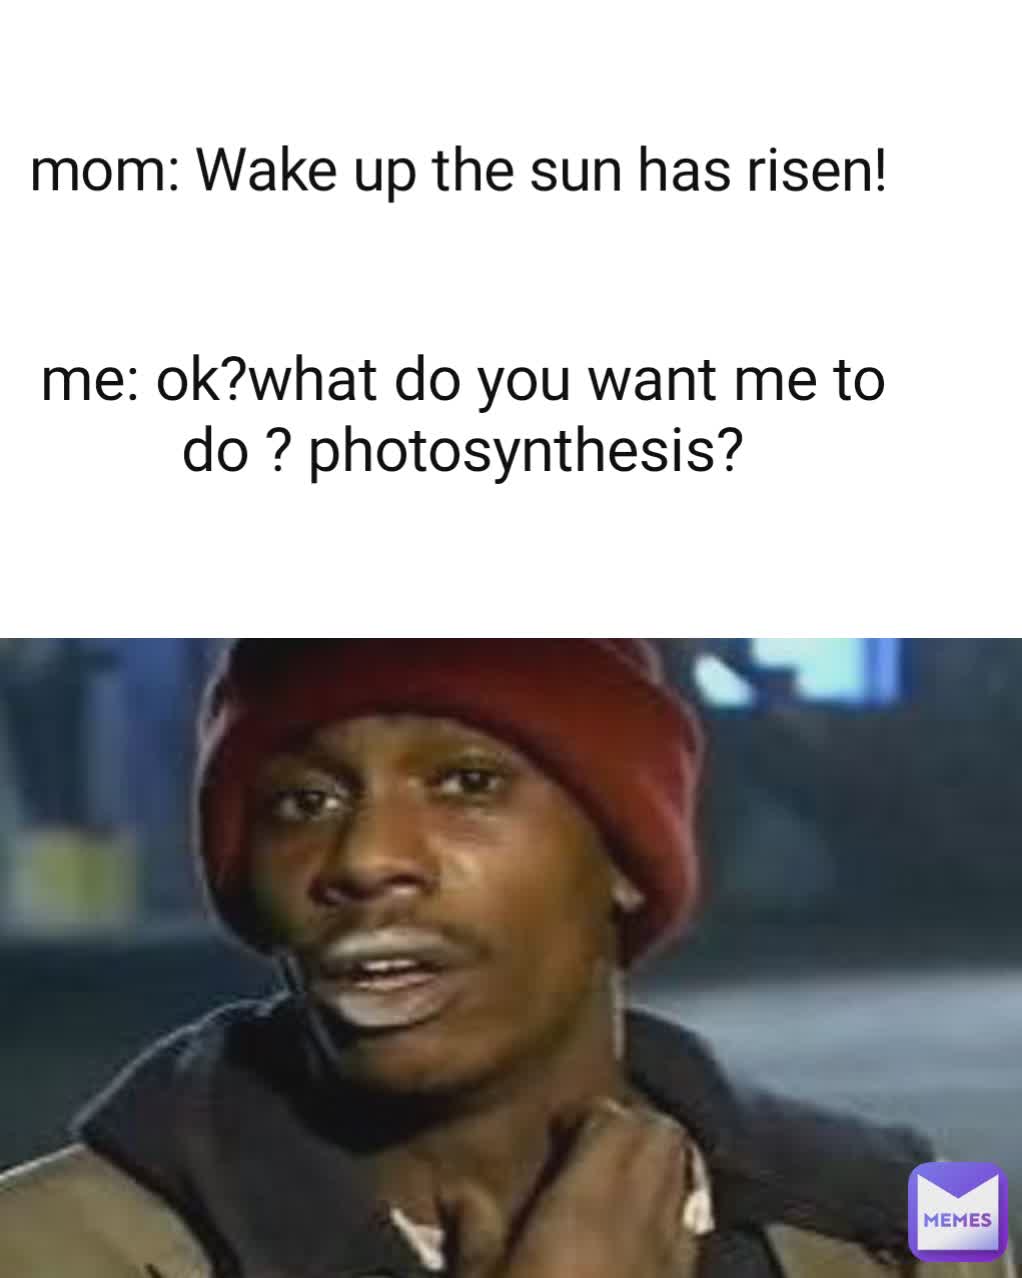 mom: Wake up the sun has risen! me: ok?what do you want me to do ? photosynthesis?